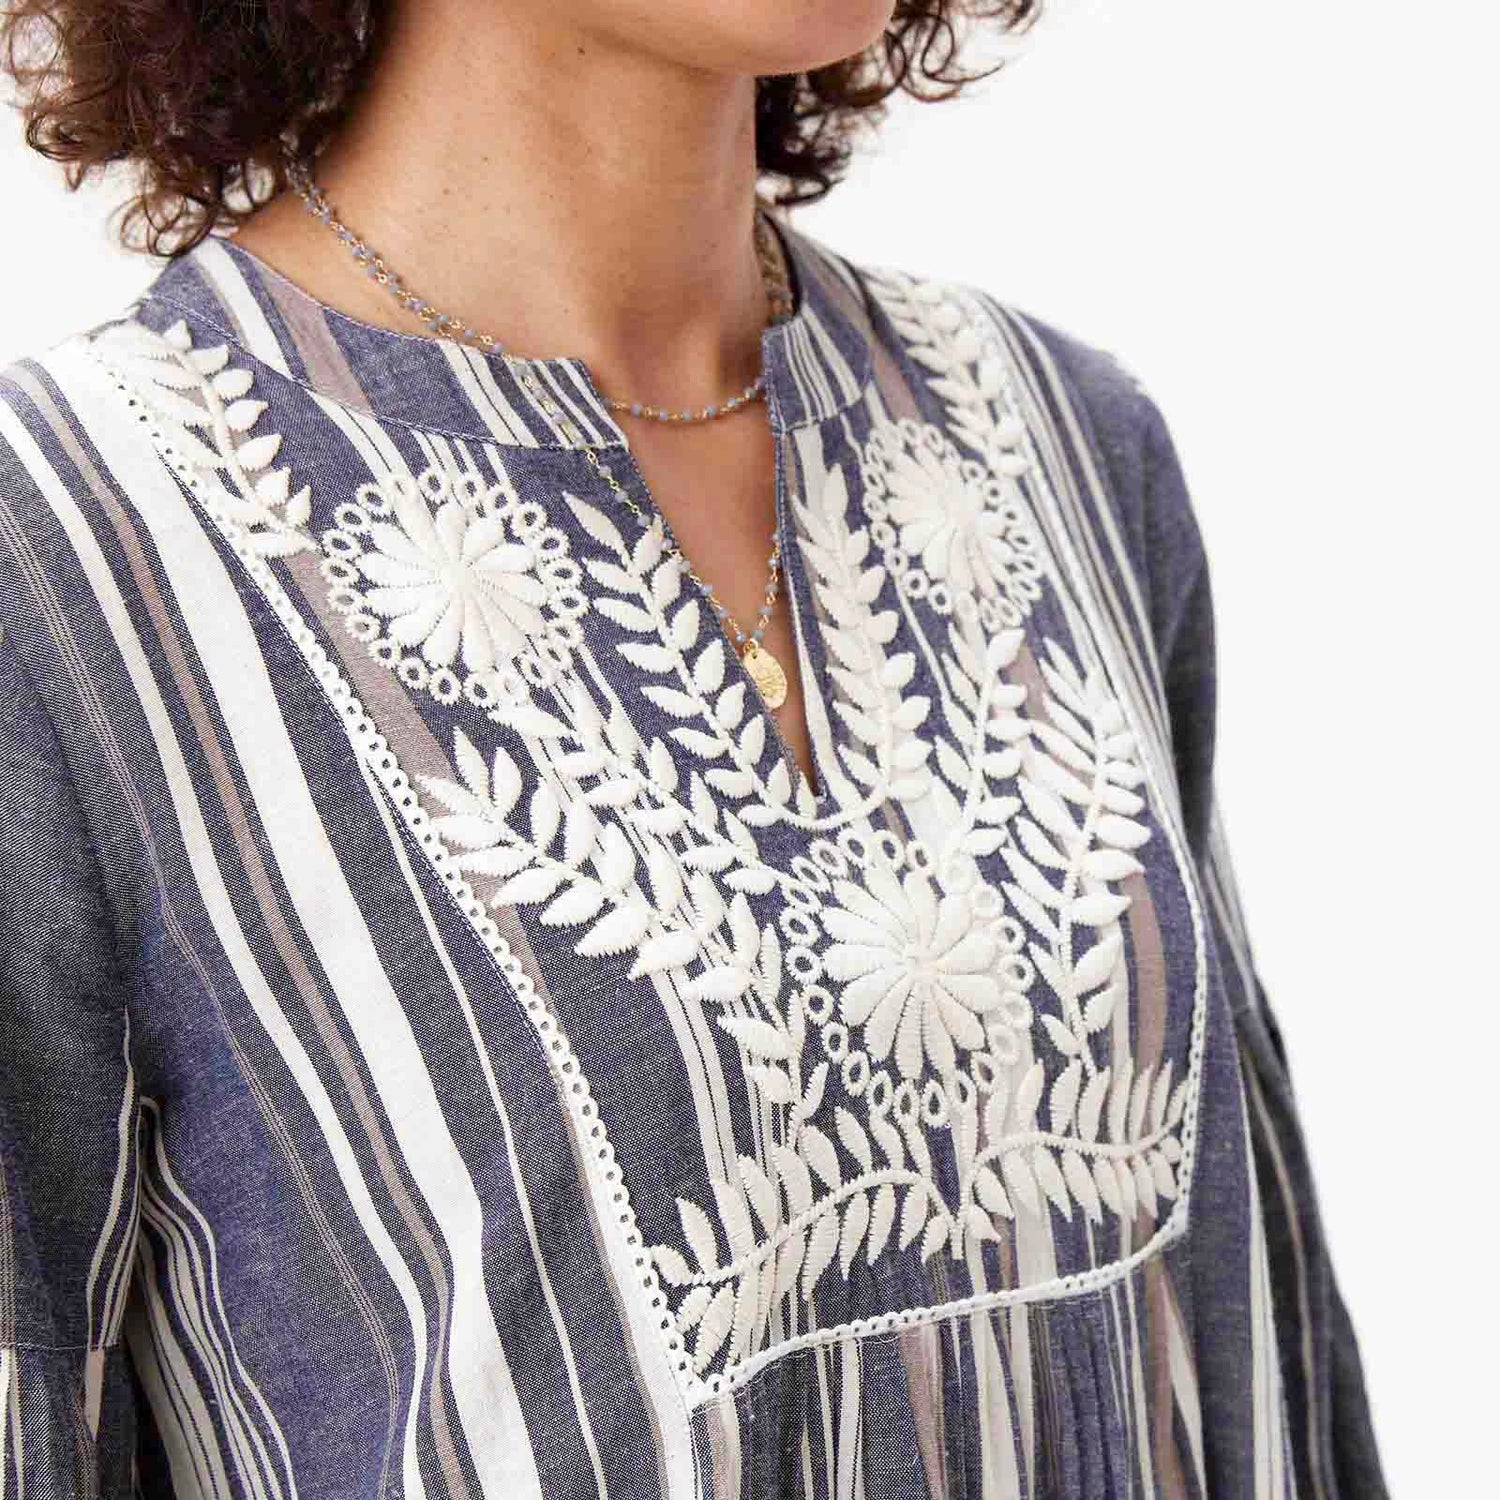 Embroidered Tunic with Woven Multi Stripe Embroidered Tunic - rockflowerpaper